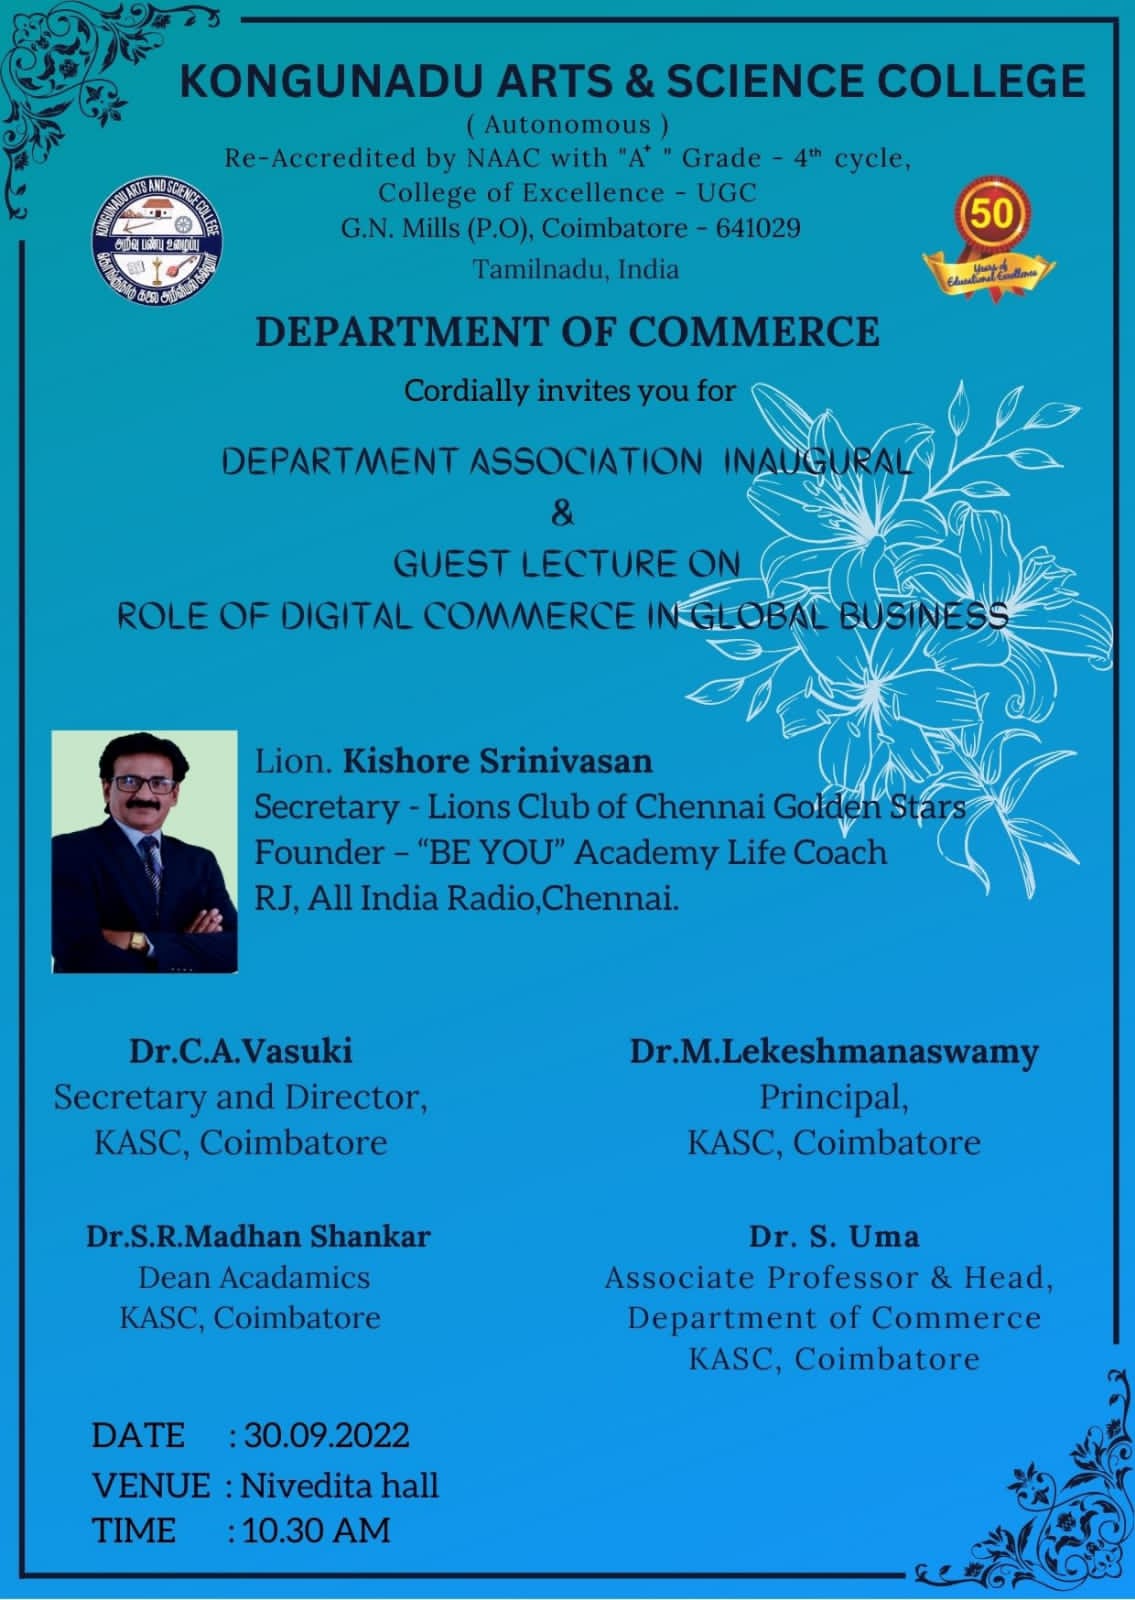 DEPARTMENT ASSOCIATION INAUGURAL & GUEST LECTURE ON ROLE OF DIGITAL COMMERCE IN GLOBAL BUSINESS